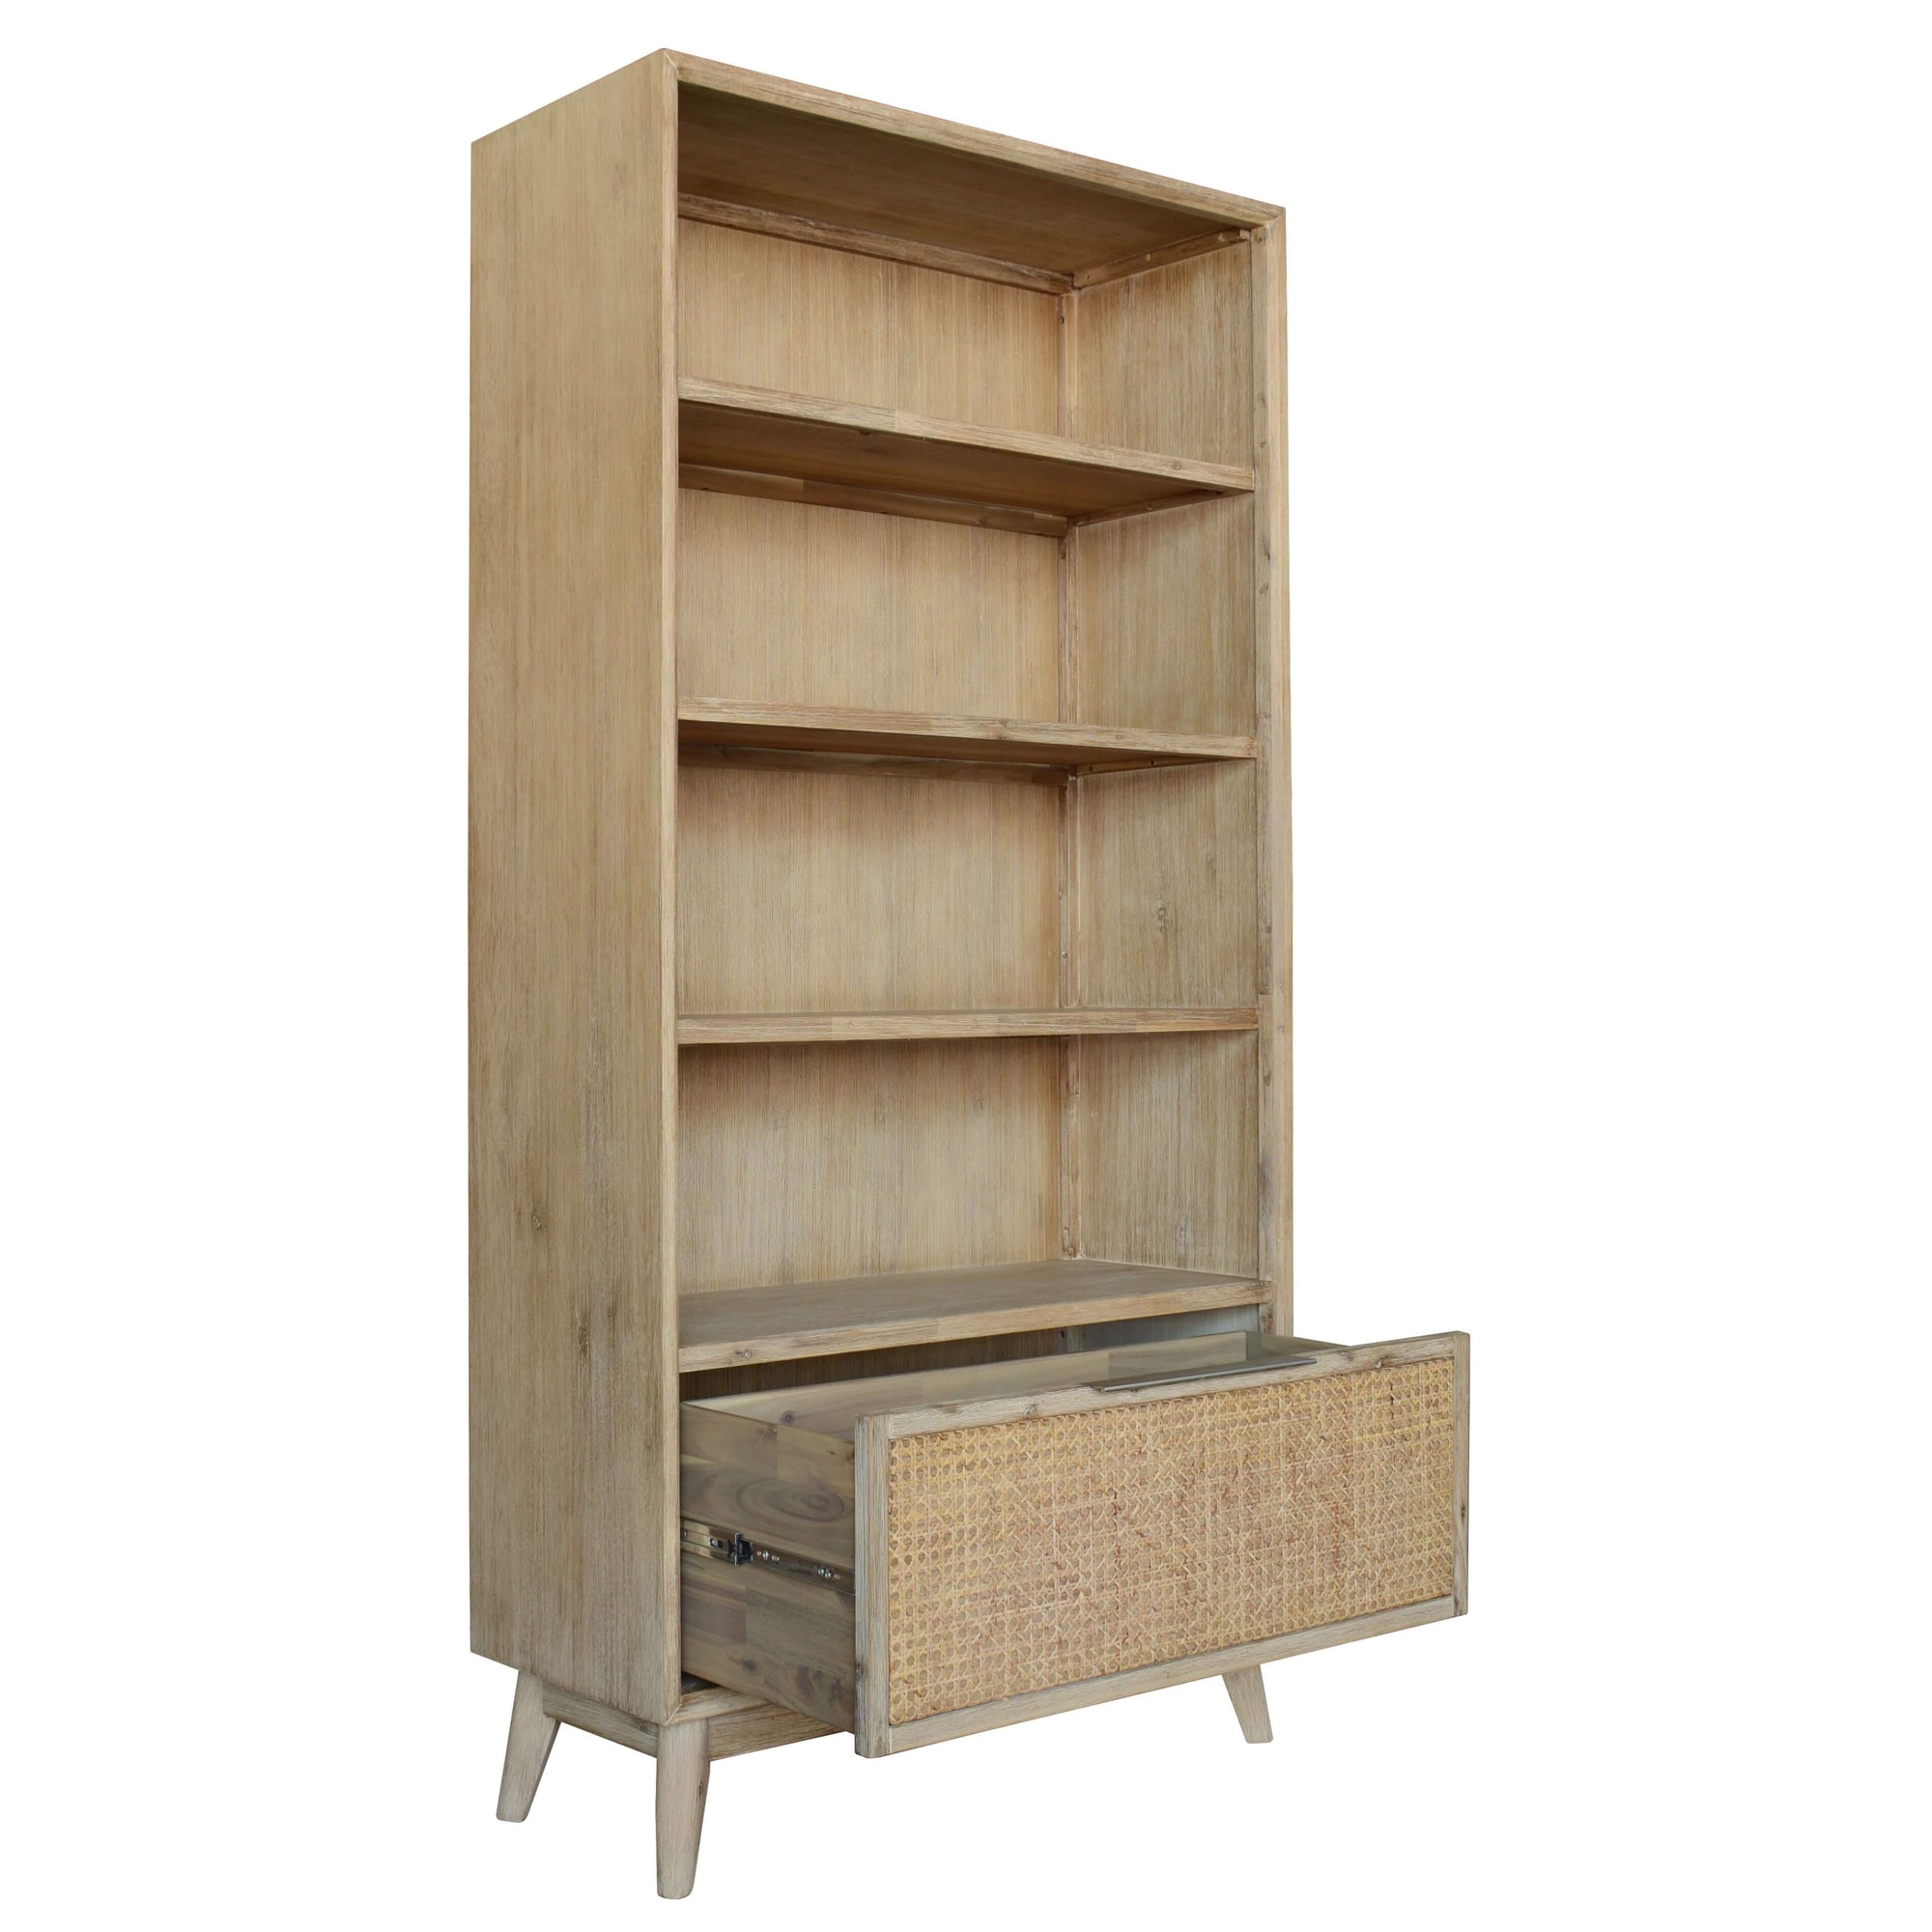 Grevillea Bookshelf Bookcase 4 Tier Drawers Solid Acacia Timber Wood - Brown-Upinteriors